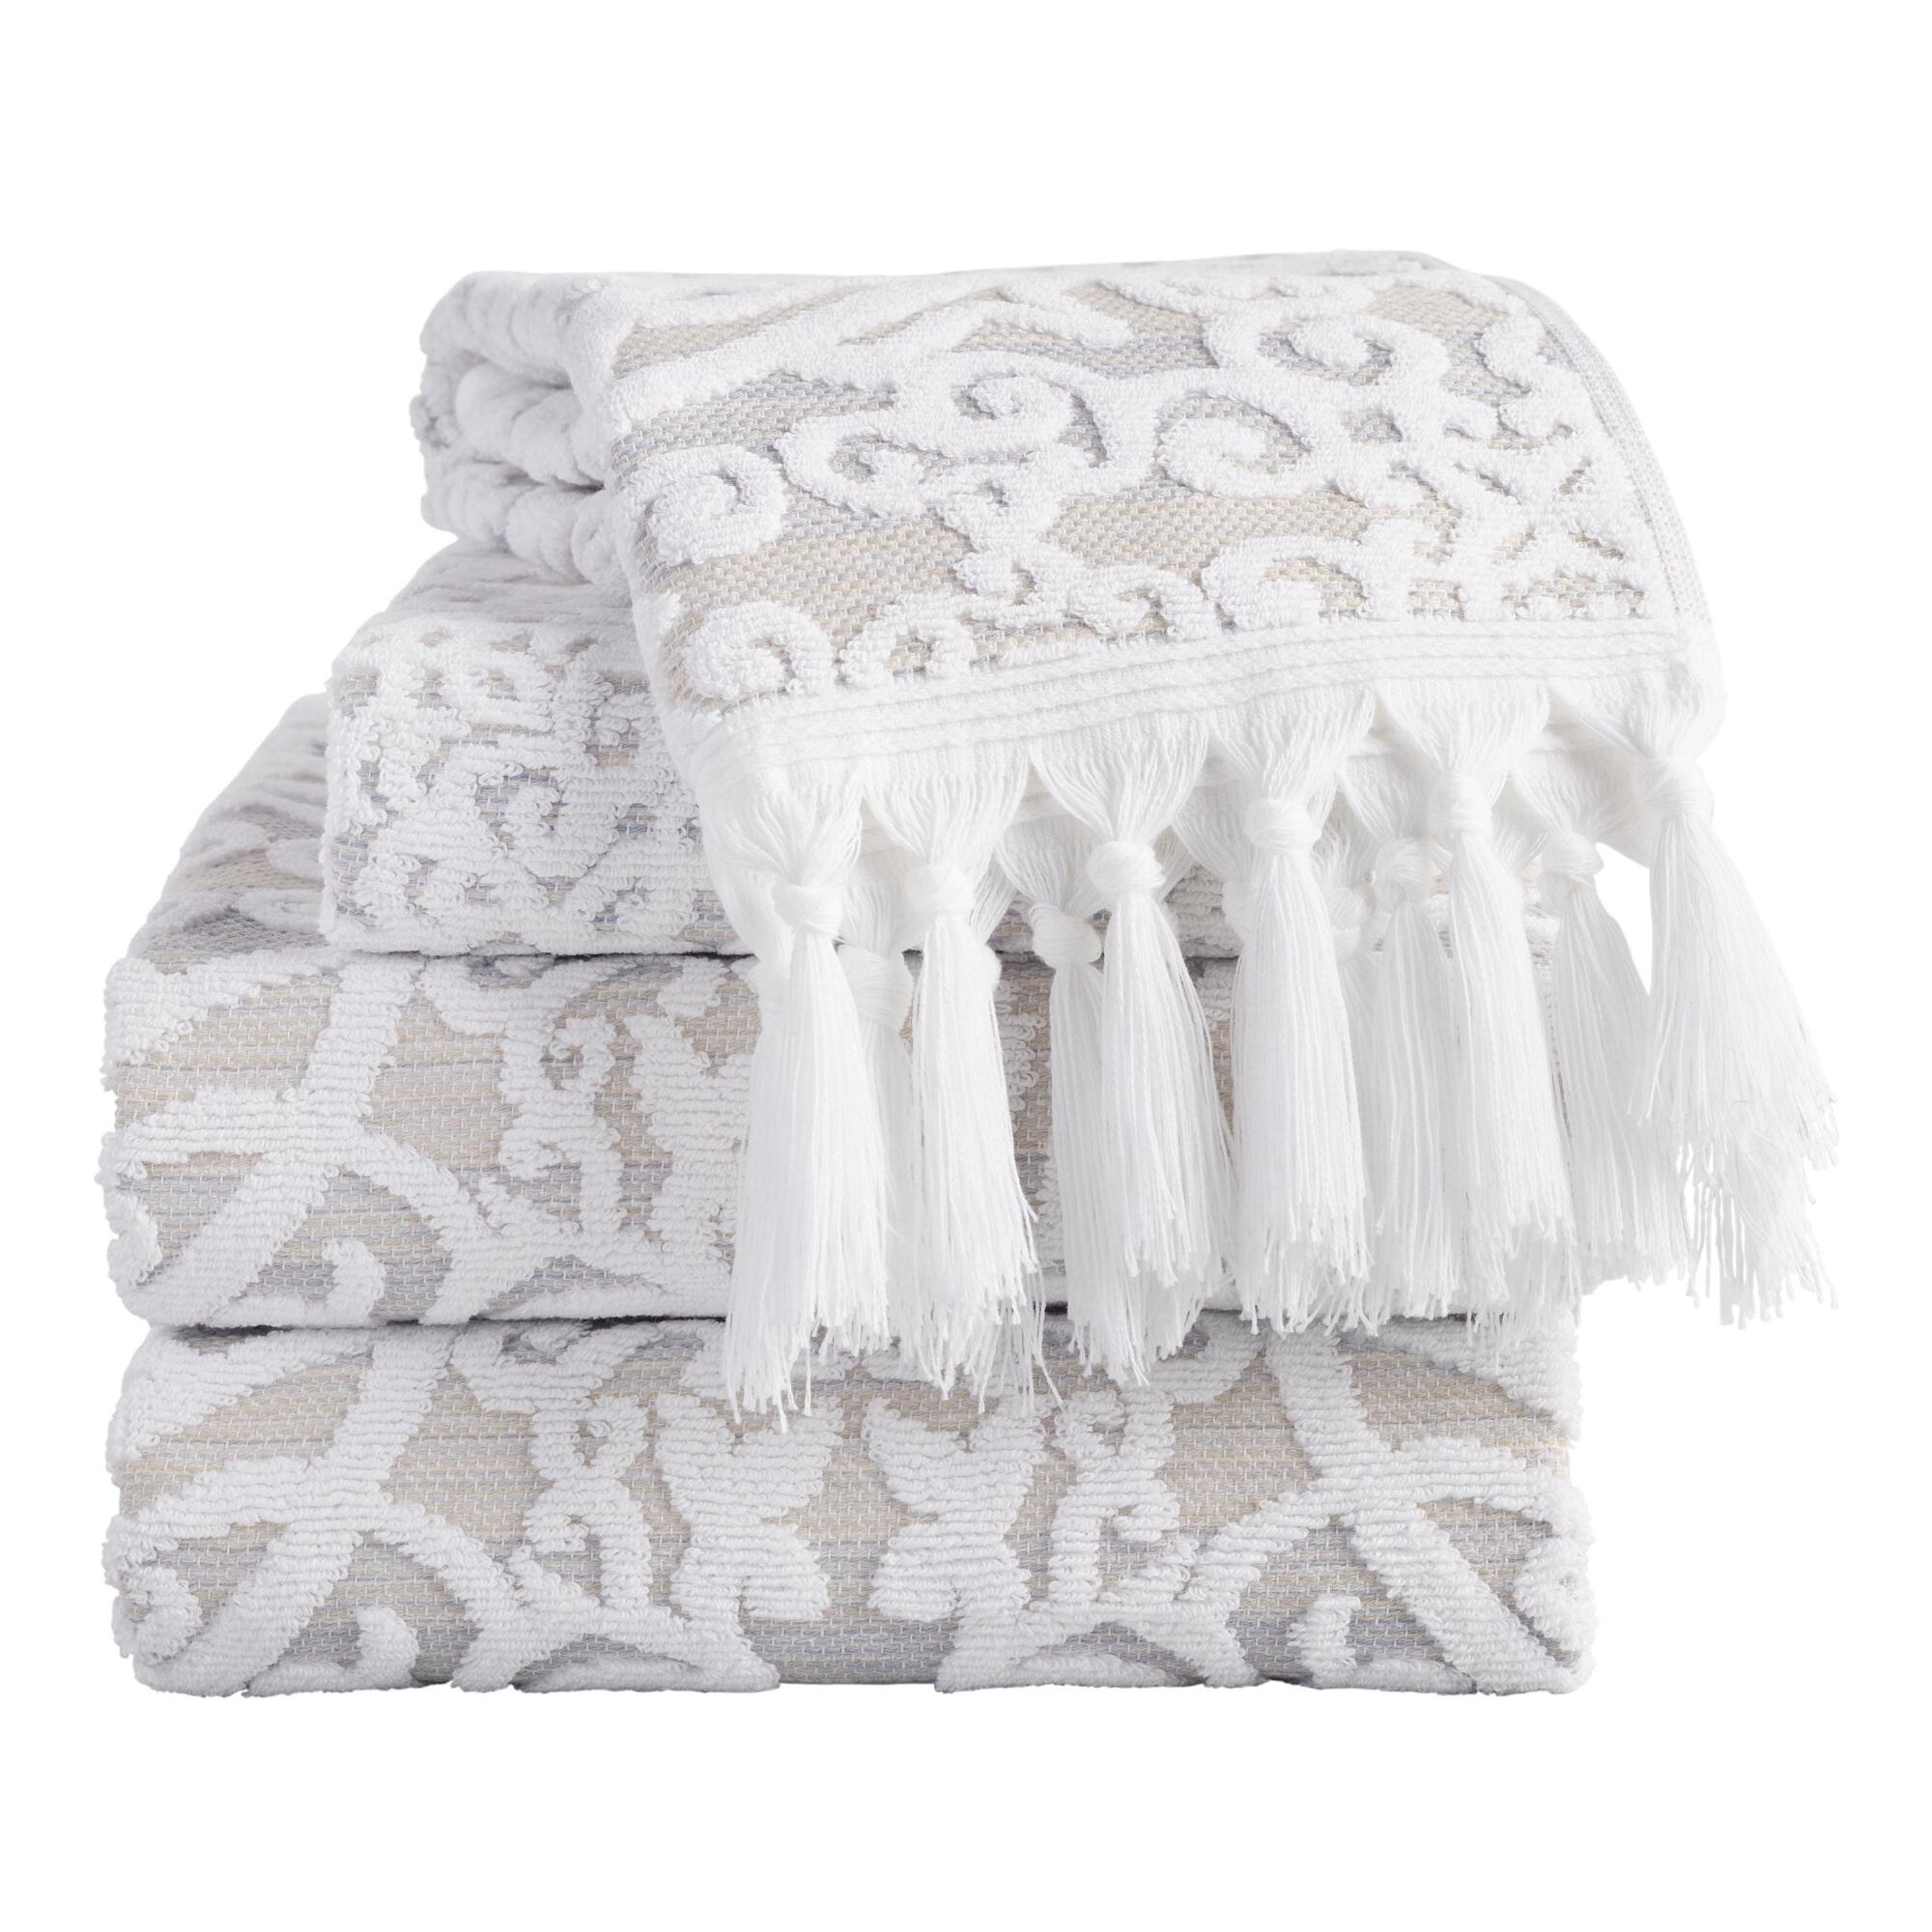 Taupe Medallion Scarlett Sculpted Towel Collection by World Market